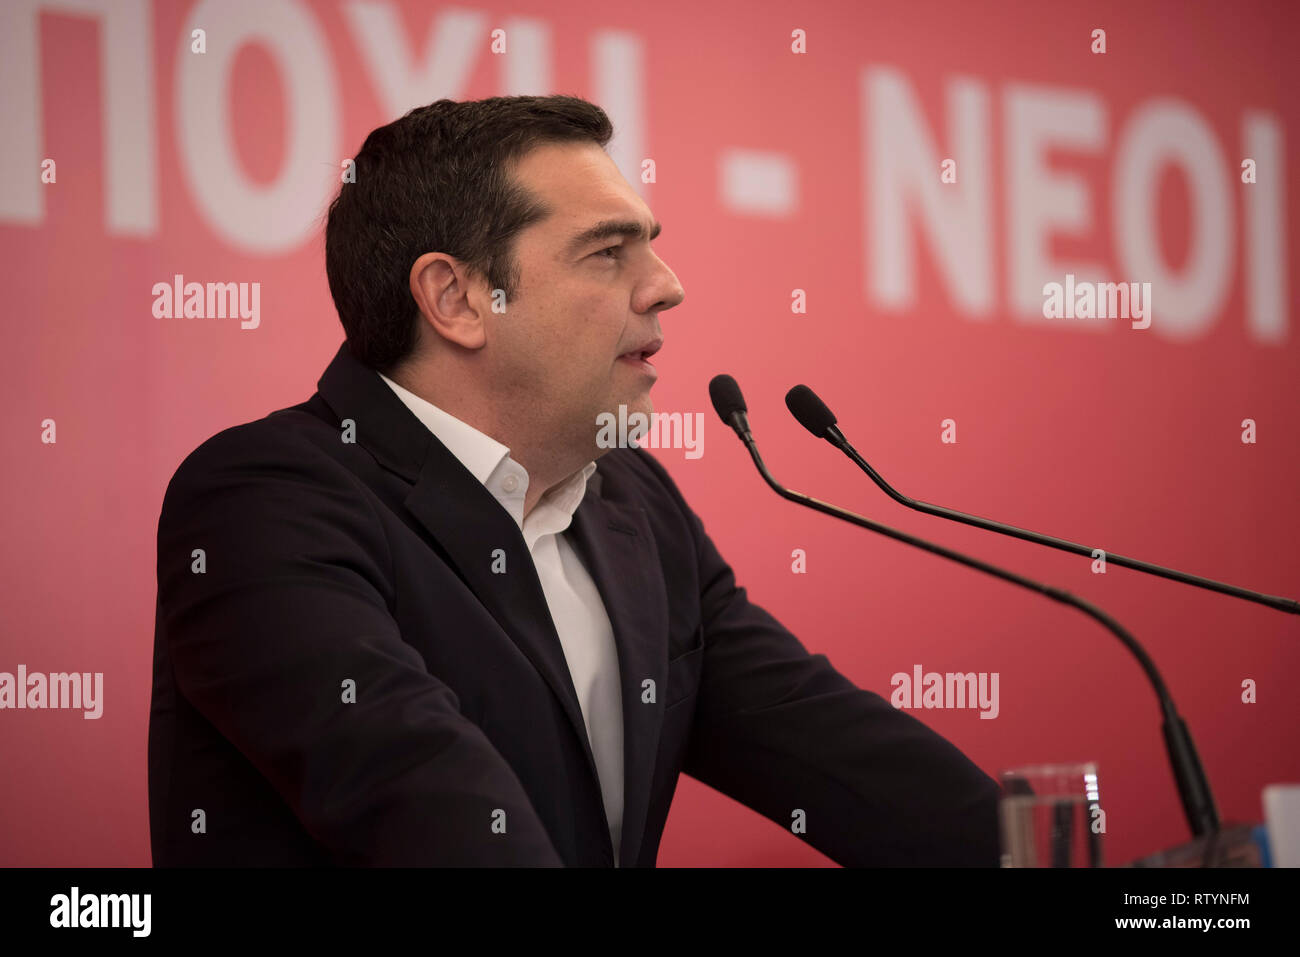 Athens, Greece. 03rd Mar, 2019. Greek prime-minister and SYRIZA leader, ALEXIS TSIPRAS, addresses members of the party’s central committee. SYRIZA's Central Committee, the highest decision making organ of the party, assembled in order to prepare for the forthcoming European Parliament 2019 elections.© Nikolas Georgiou / Alamy Live News Credit: Nikolas Georgiou/Alamy Live News Stock Photo